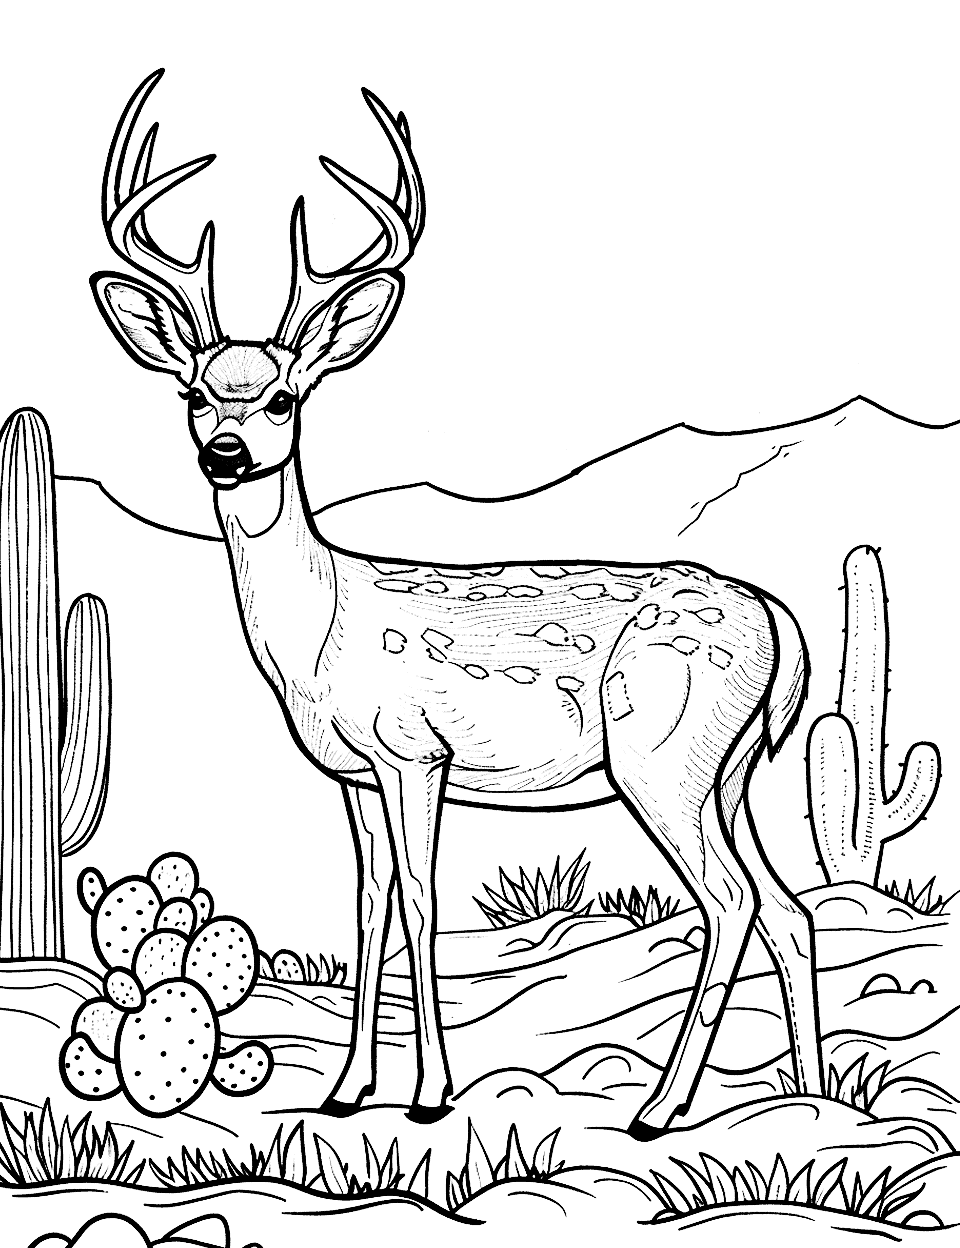 Mule Deer Amongst Cacti Coloring Page - A mule deer standing in a desert scene with several cacti around.